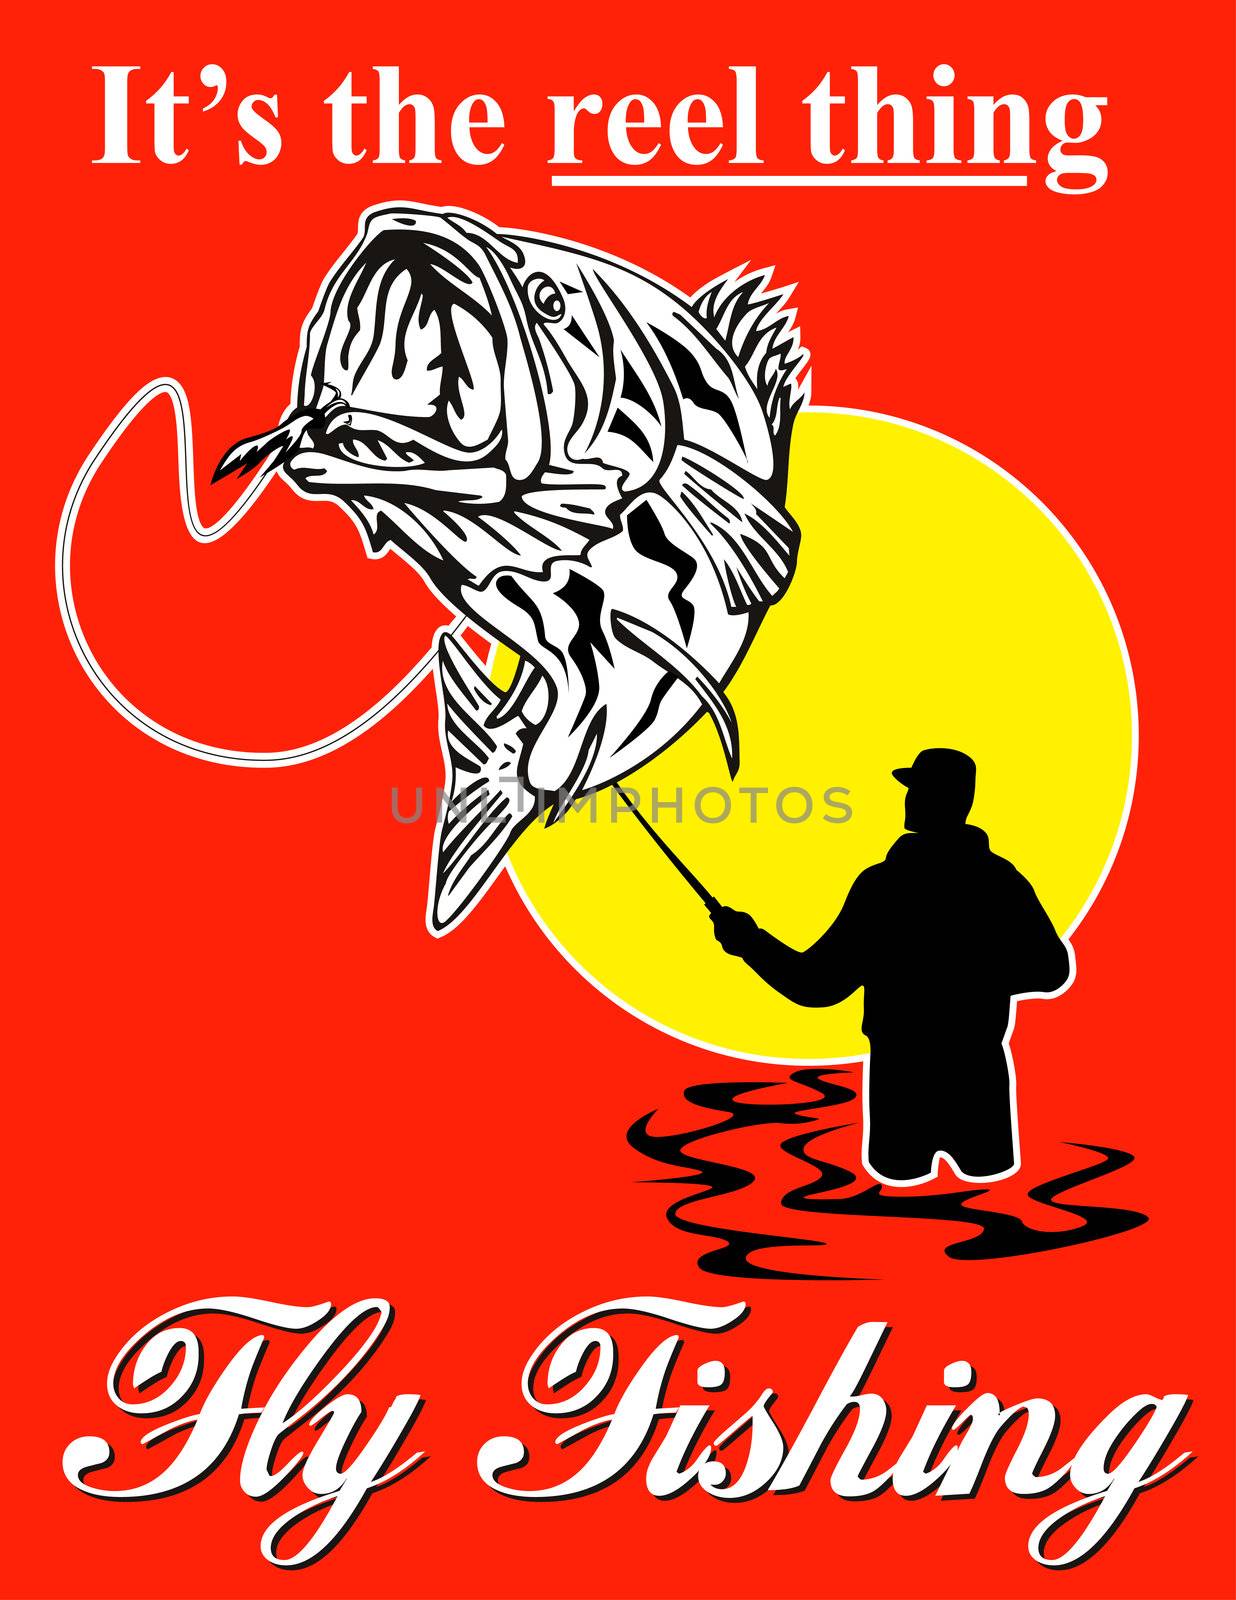 graphic design illustration of ly fisherman catching largemouth bass with fly reel with text wording   "it's the reel thing" and 
"fly fishing"set inside a red rectangle done in retro style